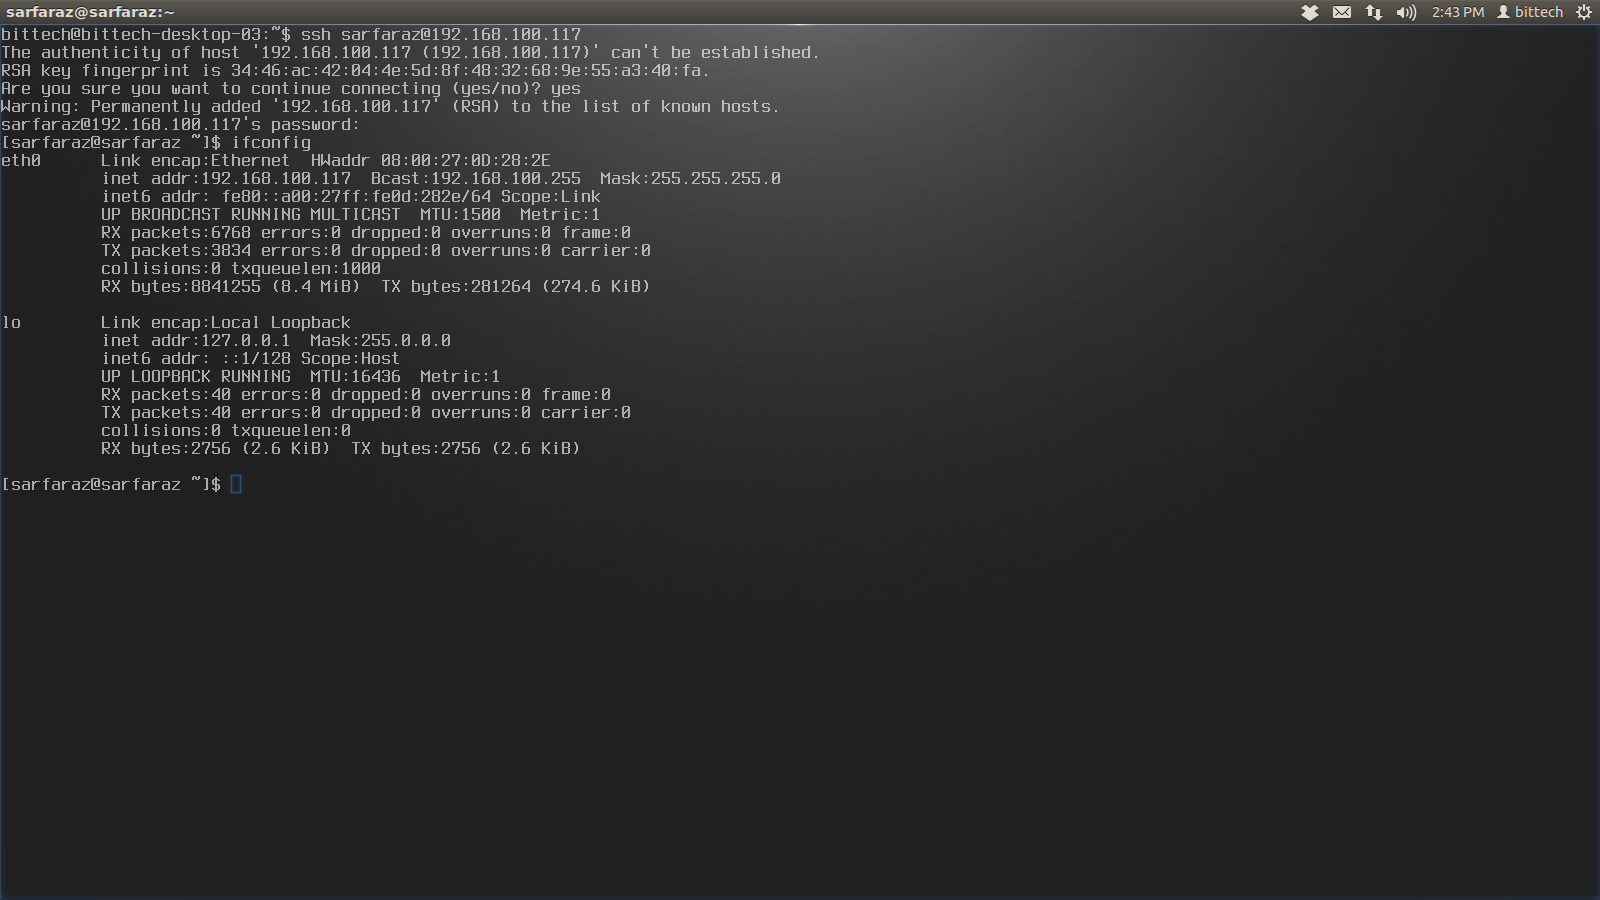 How to install SSH server in CentOS 6.4,6.3,6.2 - Techs2resolve